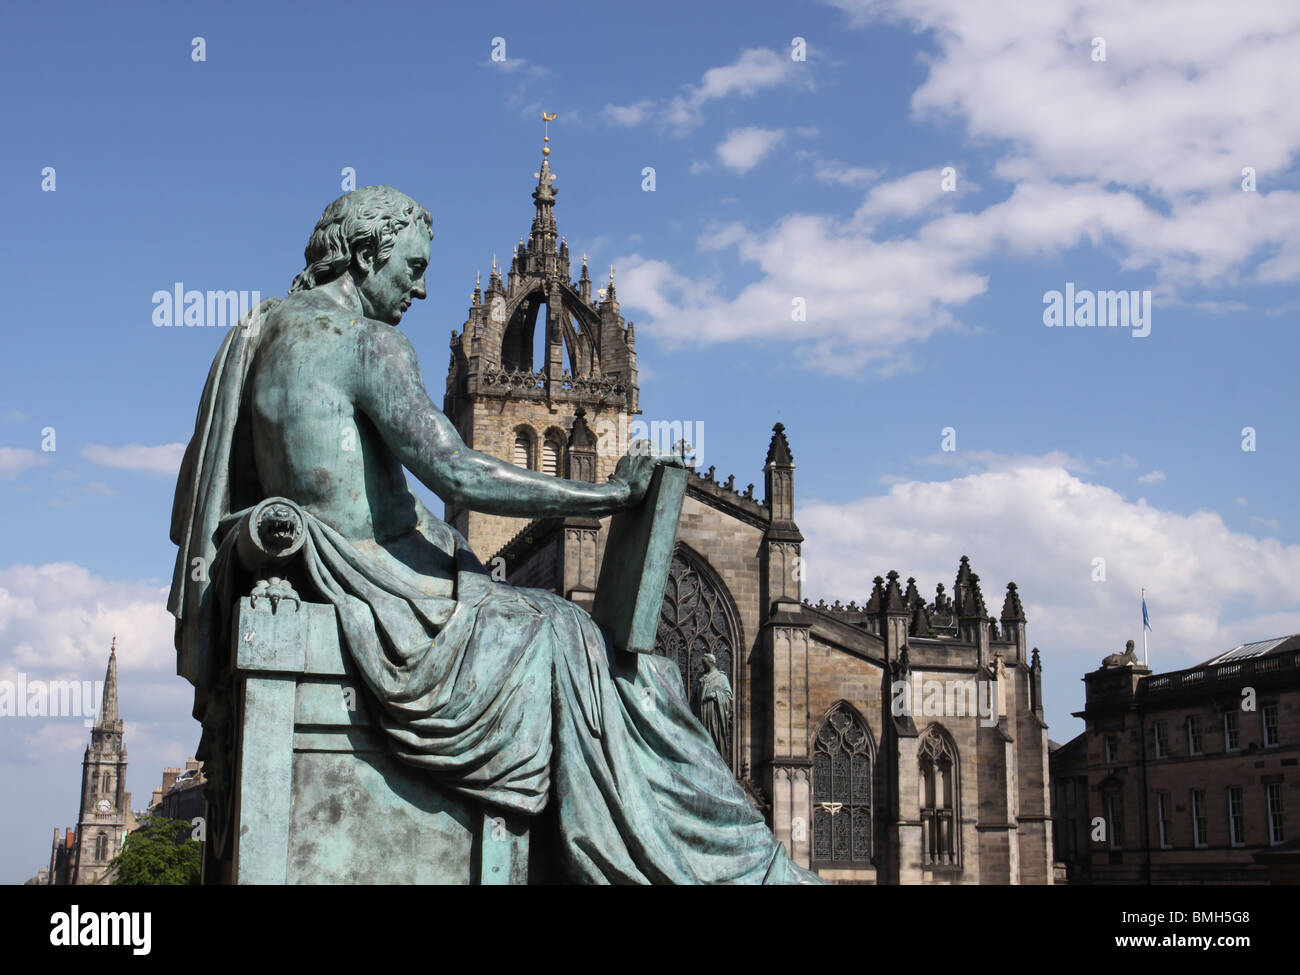 Statue of philosopher David Hume on Royal mile with St Giles Cathedral Edinburgh Scotland June 2010 Stock Photo